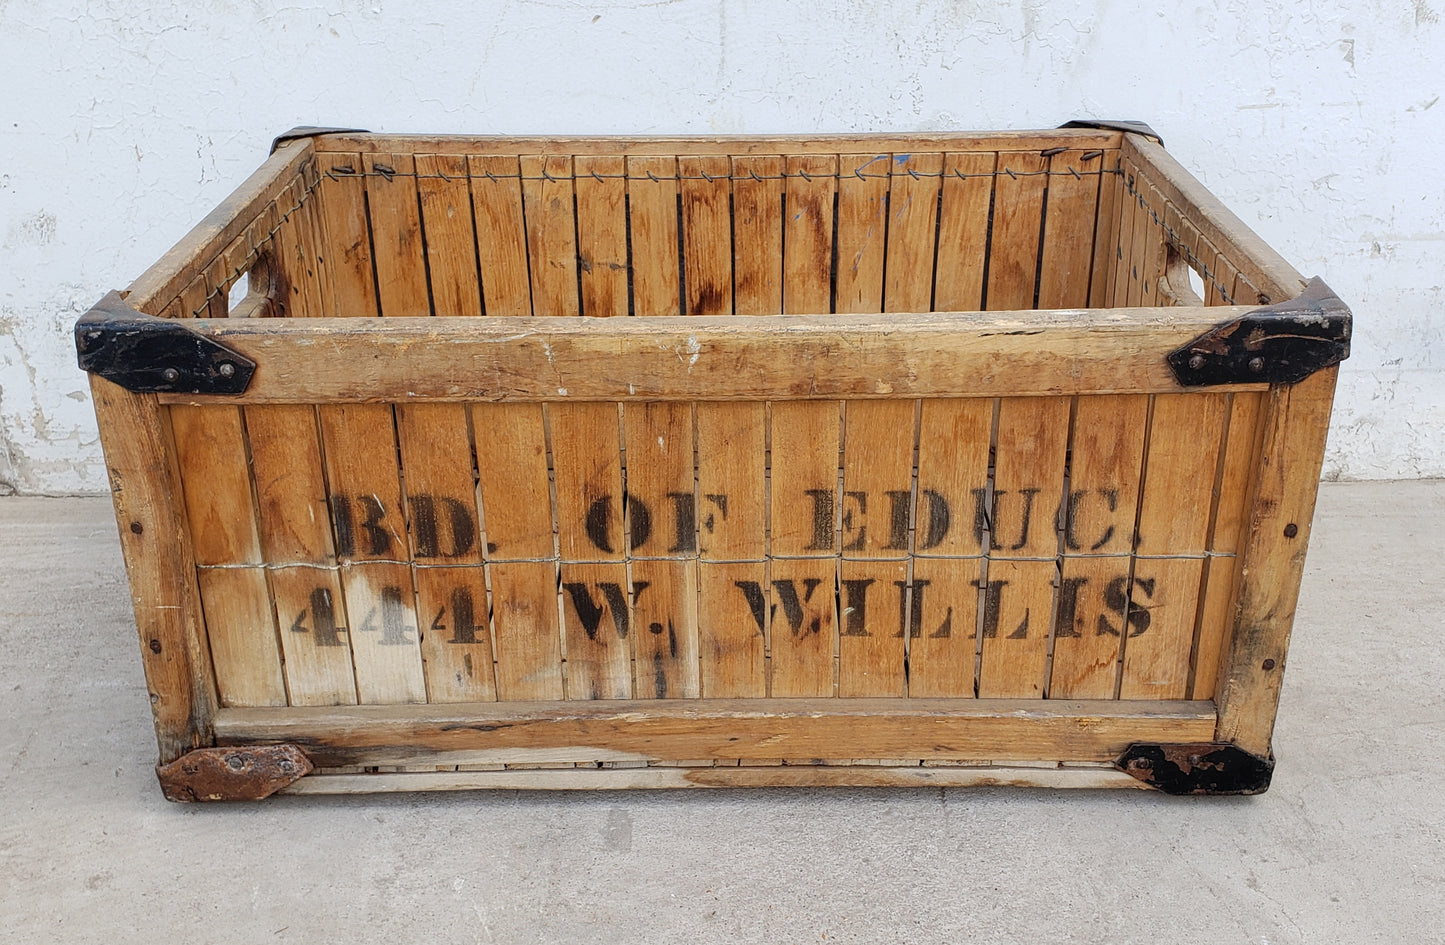 "Board of Education" Wooden Crate